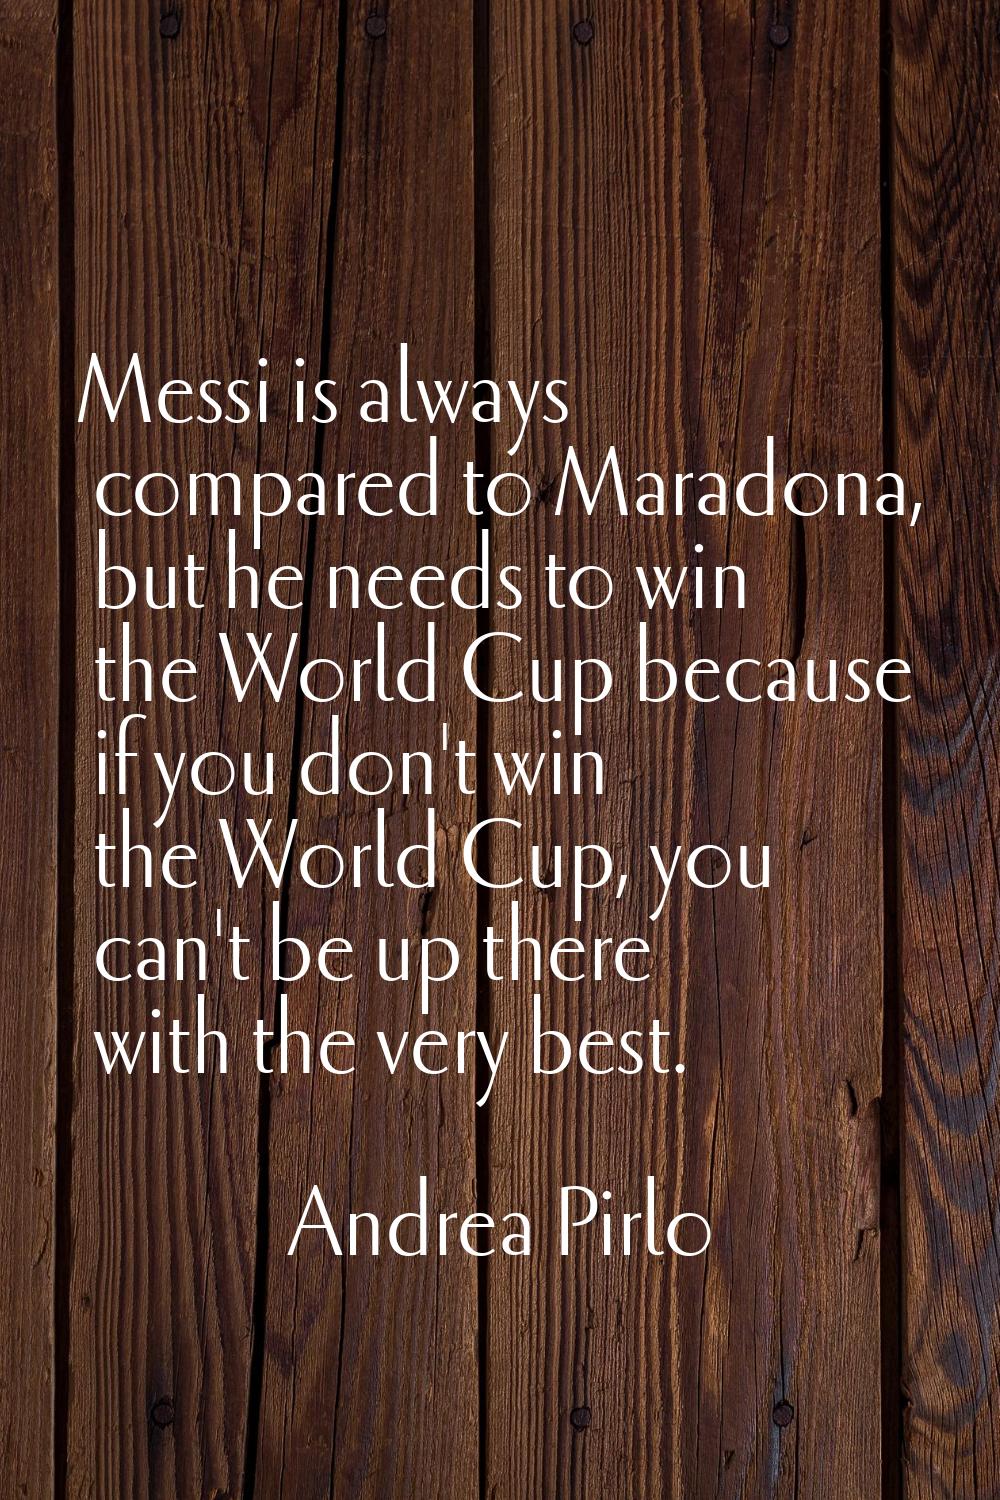 Messi is always compared to Maradona, but he needs to win the World Cup because if you don't win th